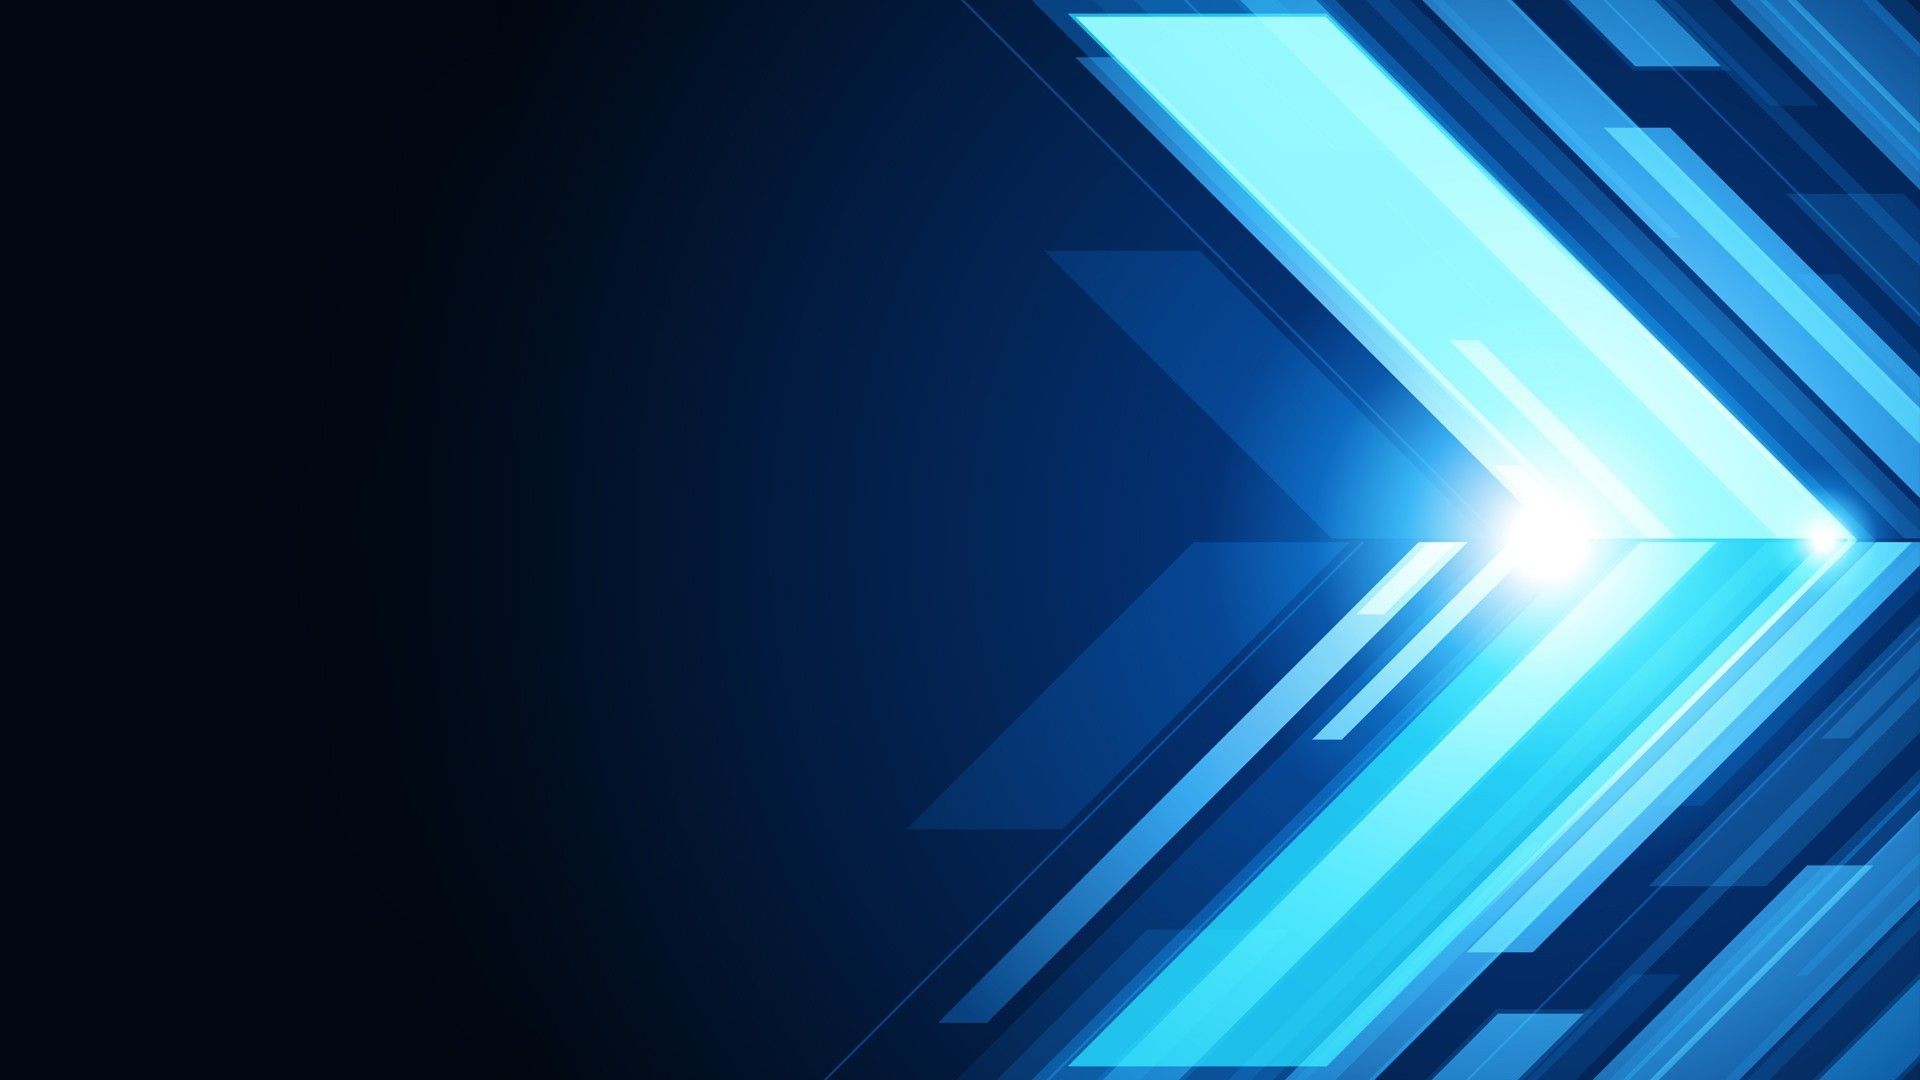 Blue Artistic Right Arrow Wallpapers